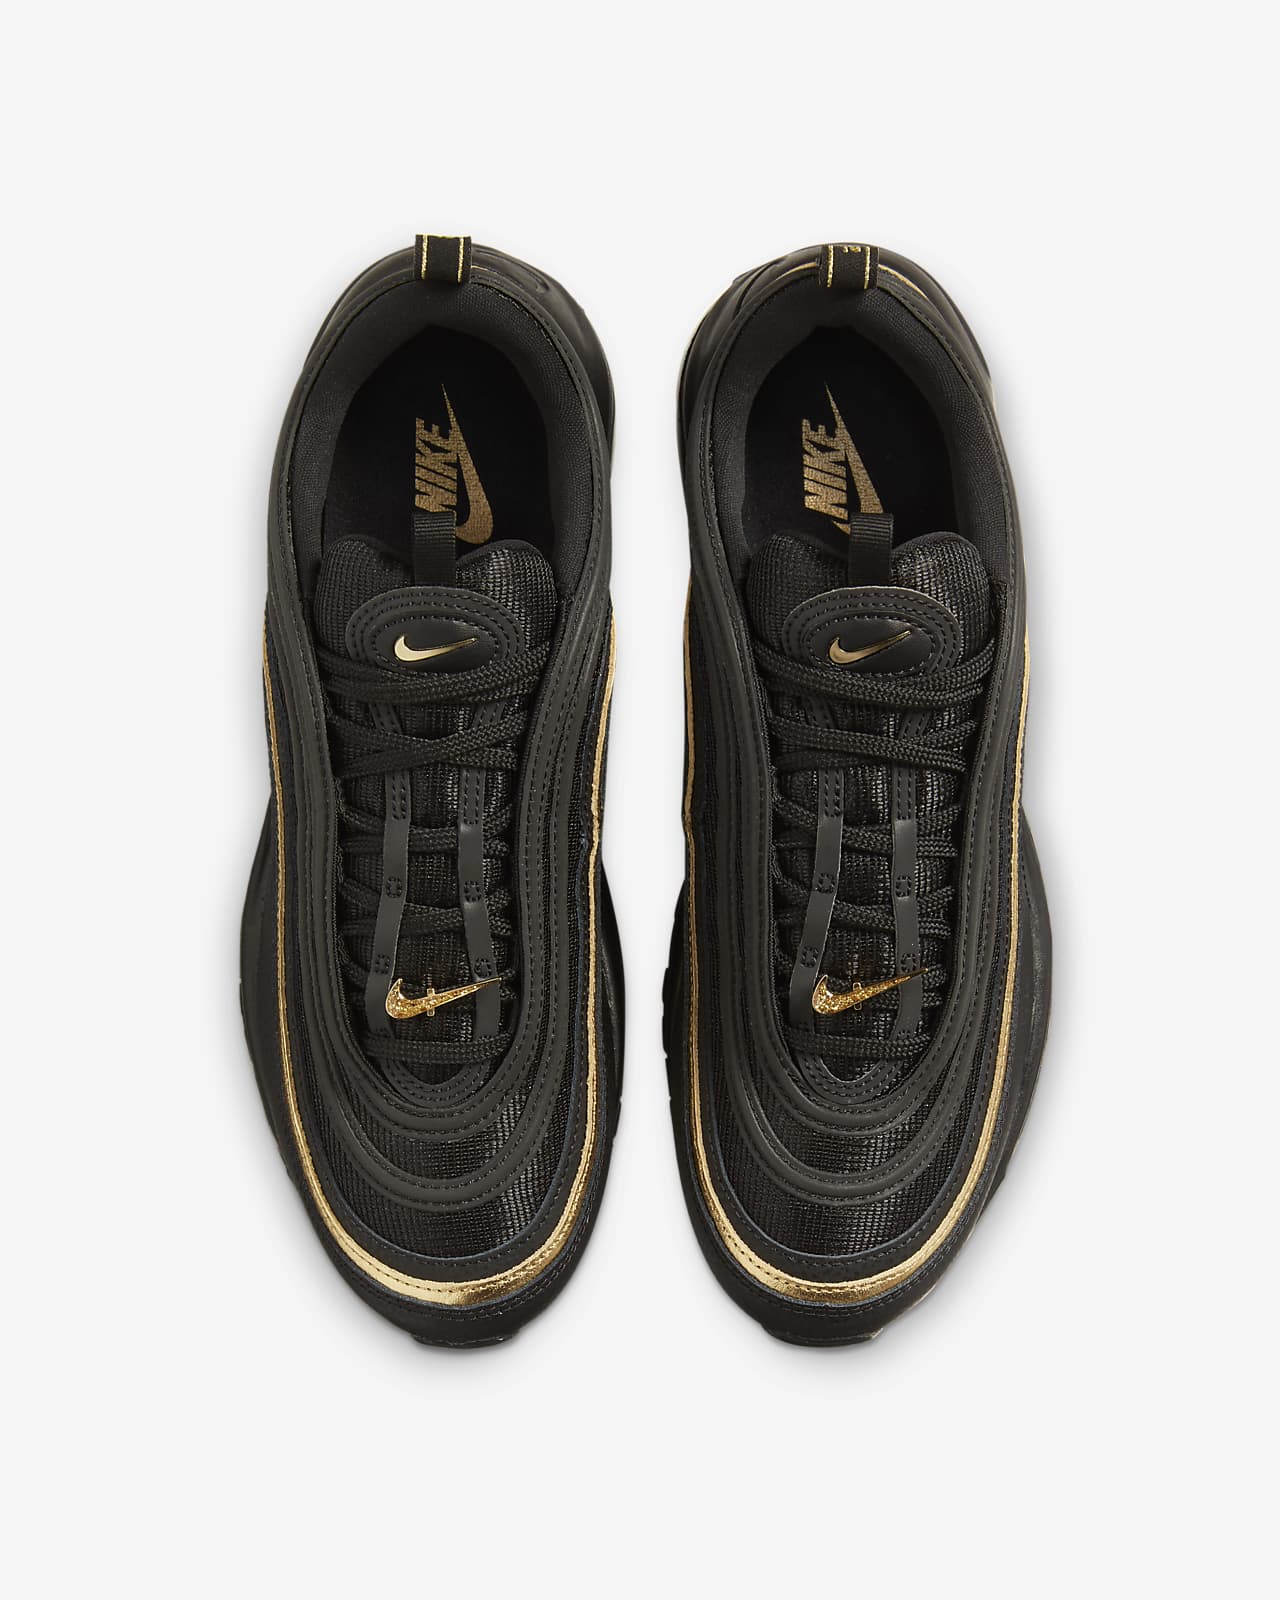 Athletic Men Shoes by   Nike shoes air max, Nike air max 97